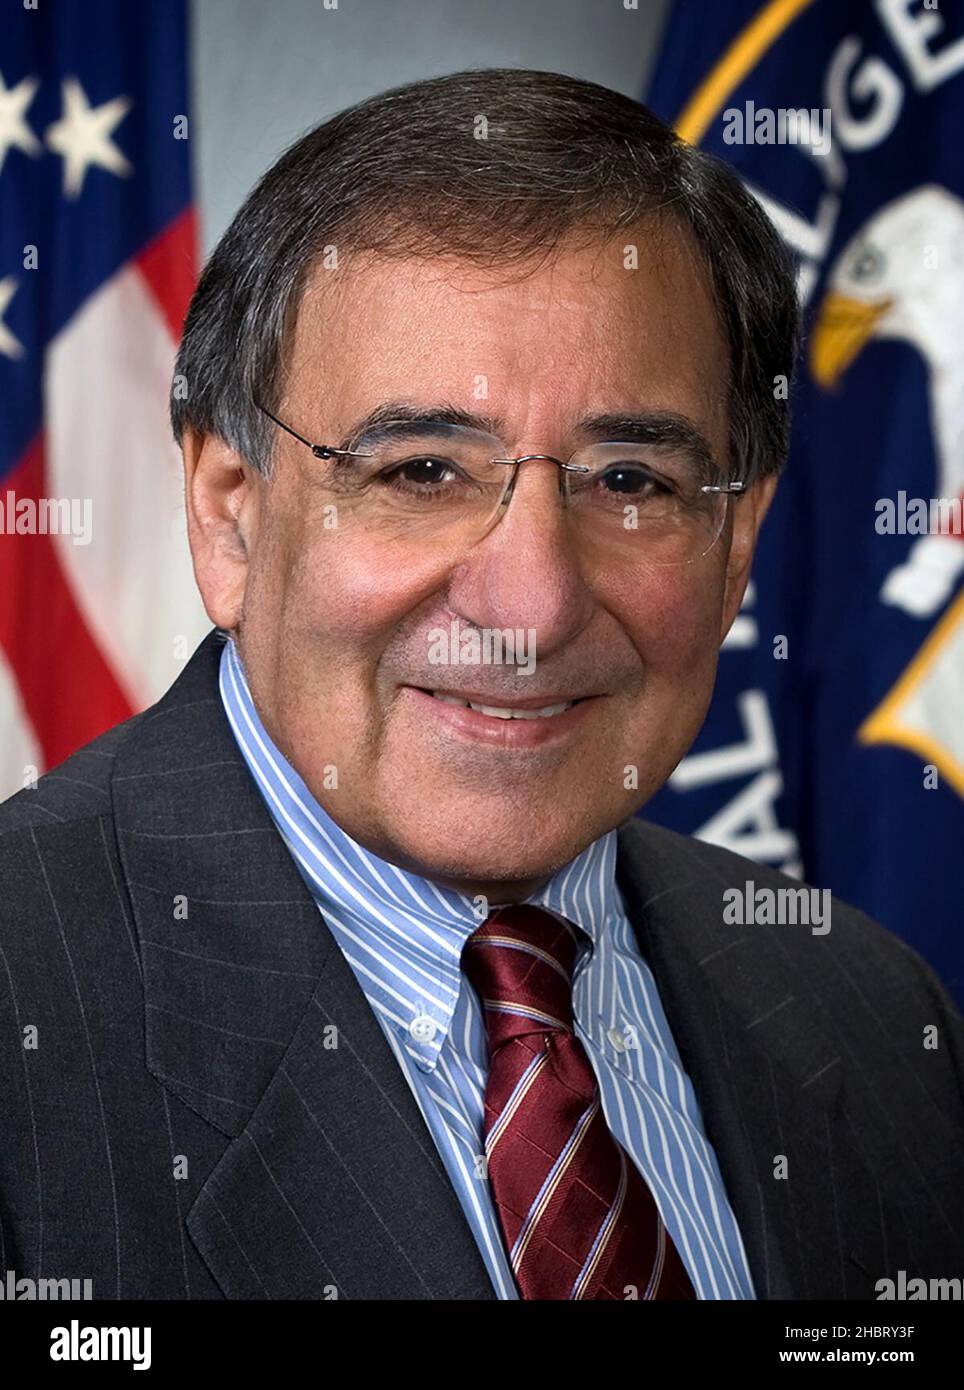 Official portrait of the former Director of the Central Intelligence Agency Leon Panetta. ca.  17 February 2009 Stock Photo